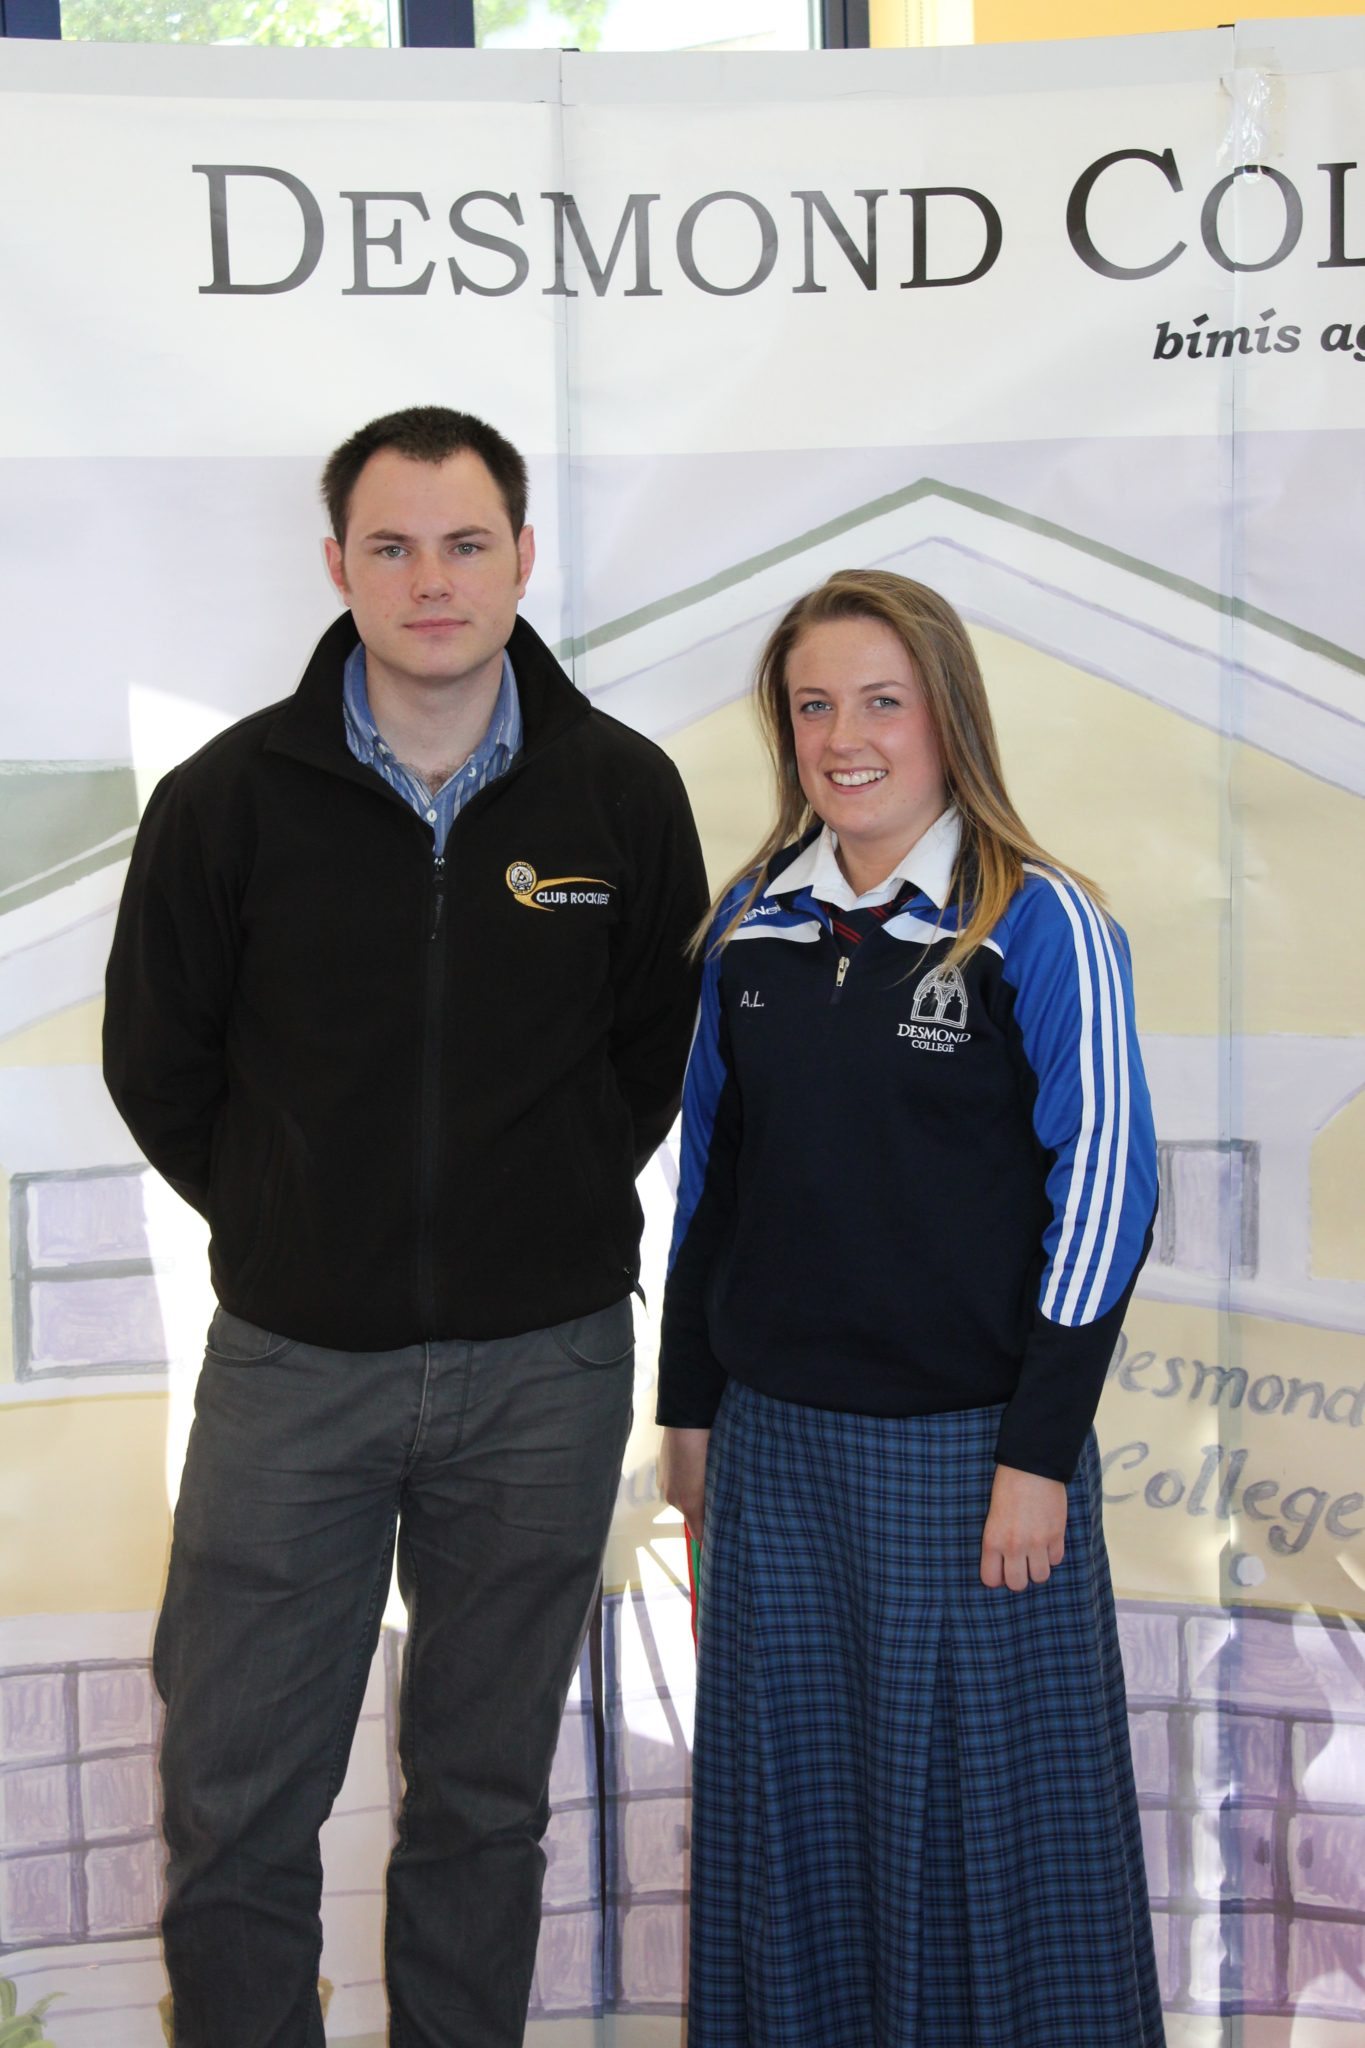 Desmond College Student Awards: May 2015: SPORTS AWARDS 2nd year : Mr King with Aoife Larkin